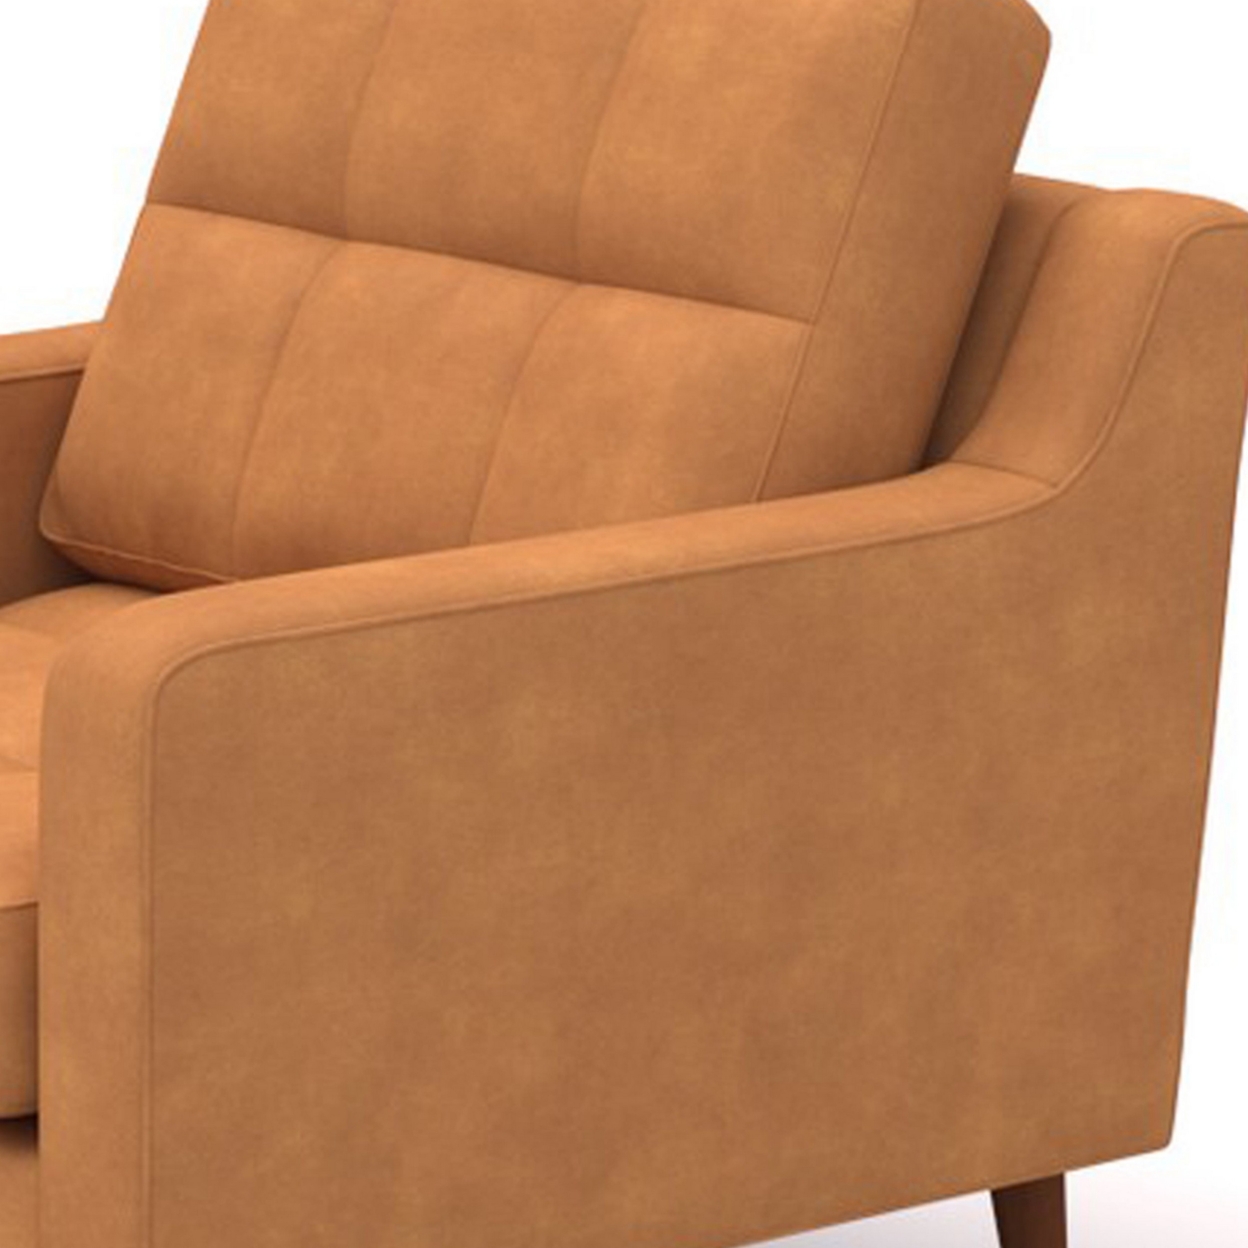 Juan 39 Inch Modular Chair With Tufted Back And Seat, Modern Brown Leather- Saltoro Sherpi